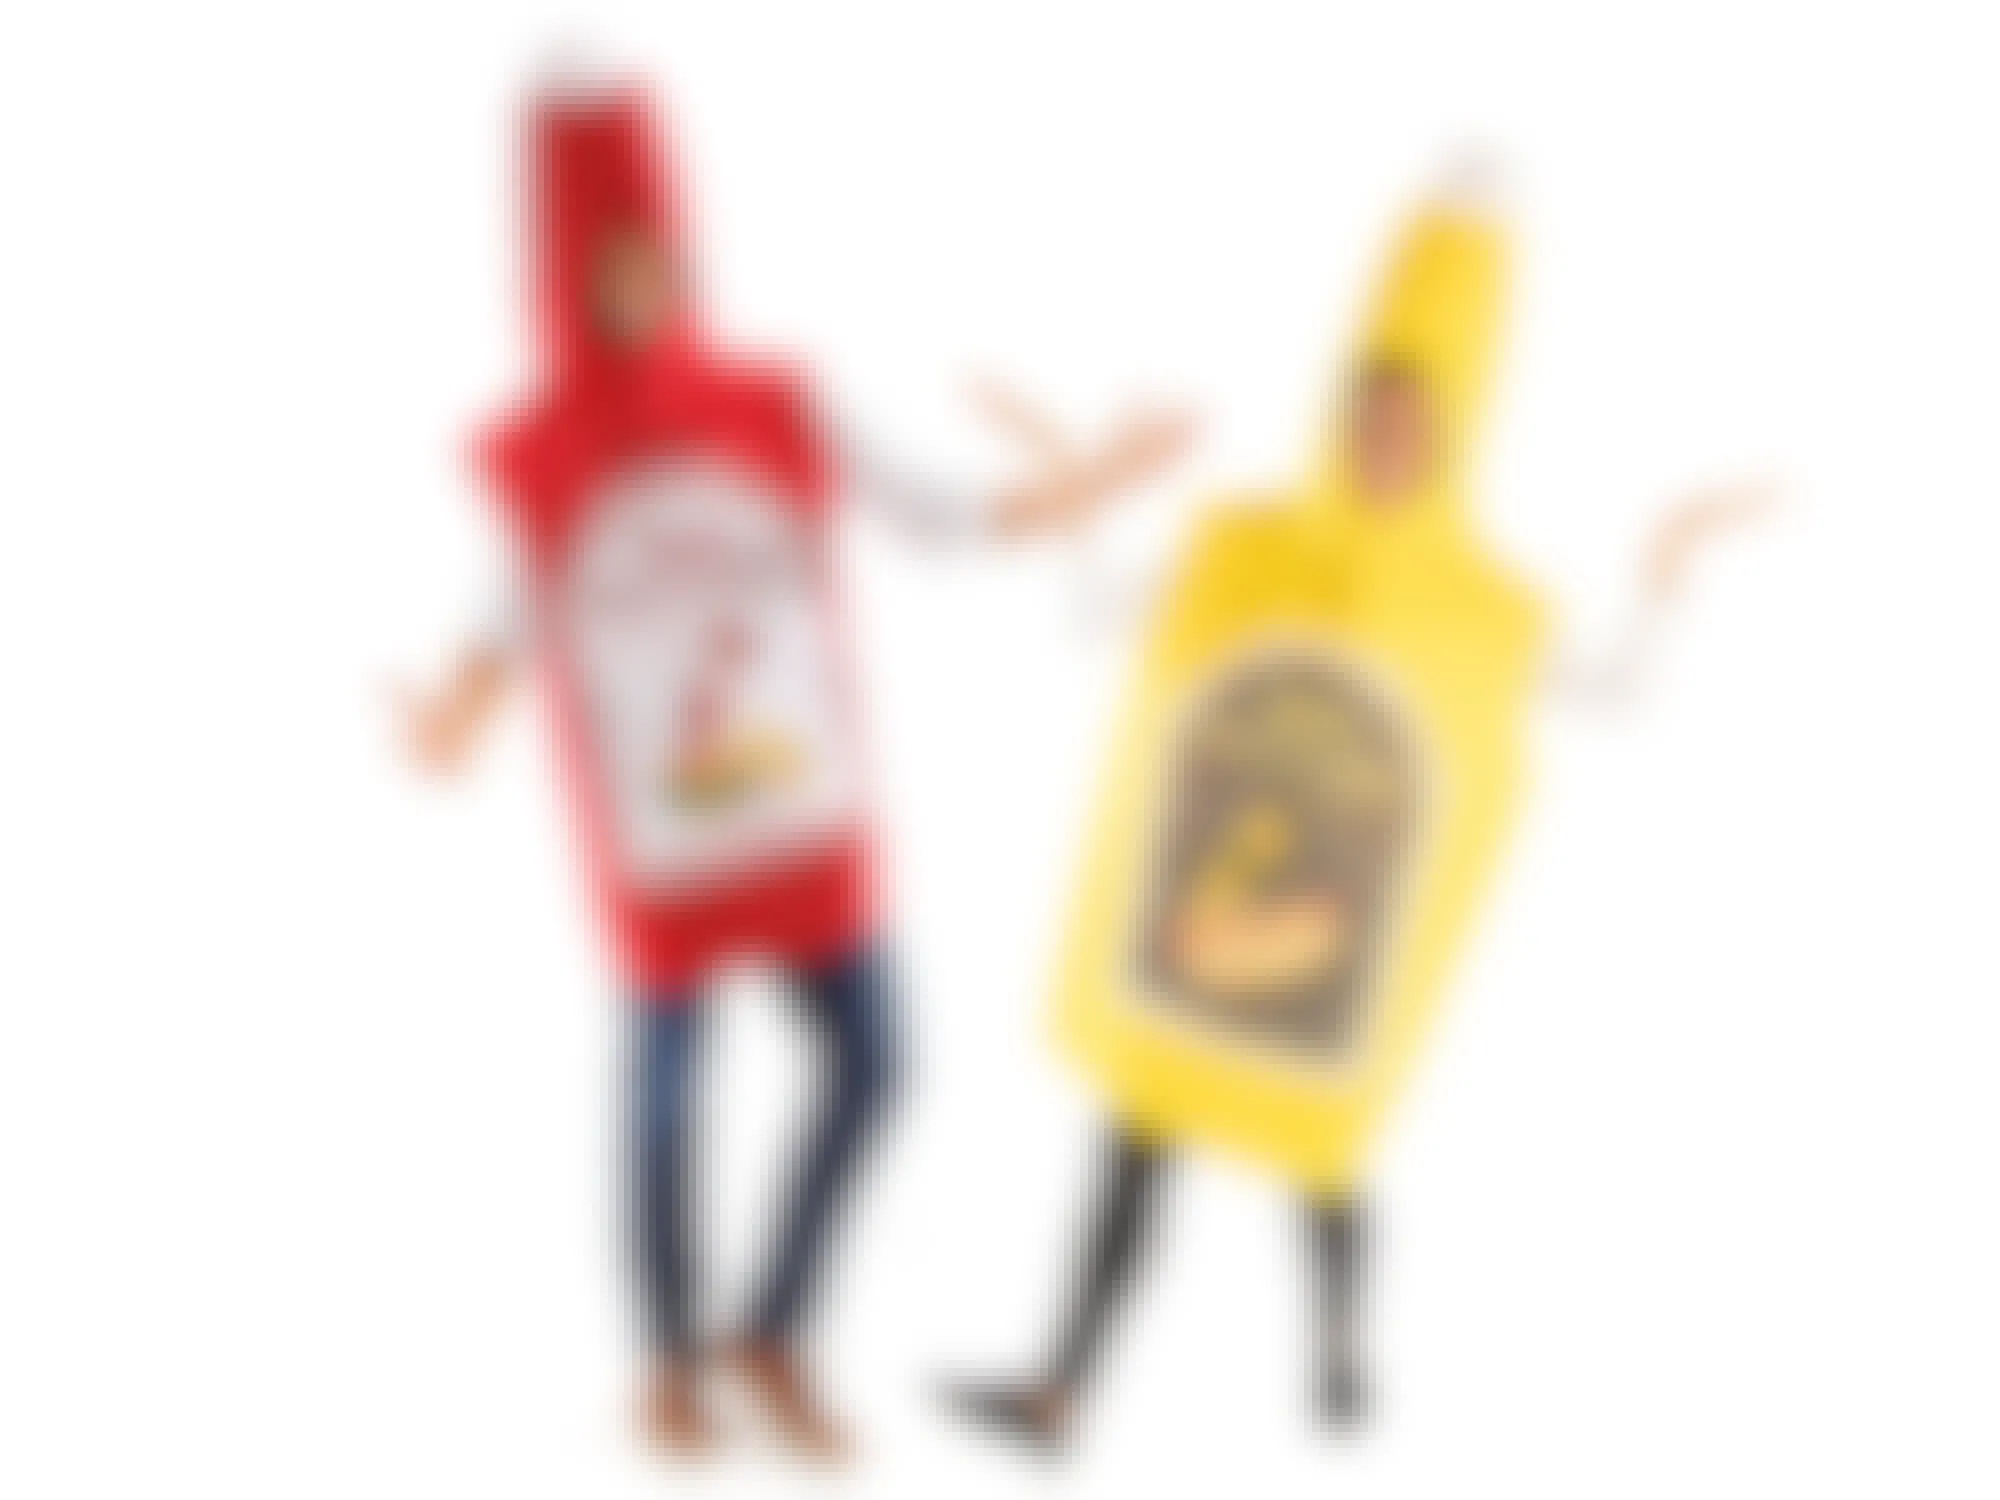 ketchup and mustard couples halloween costumes